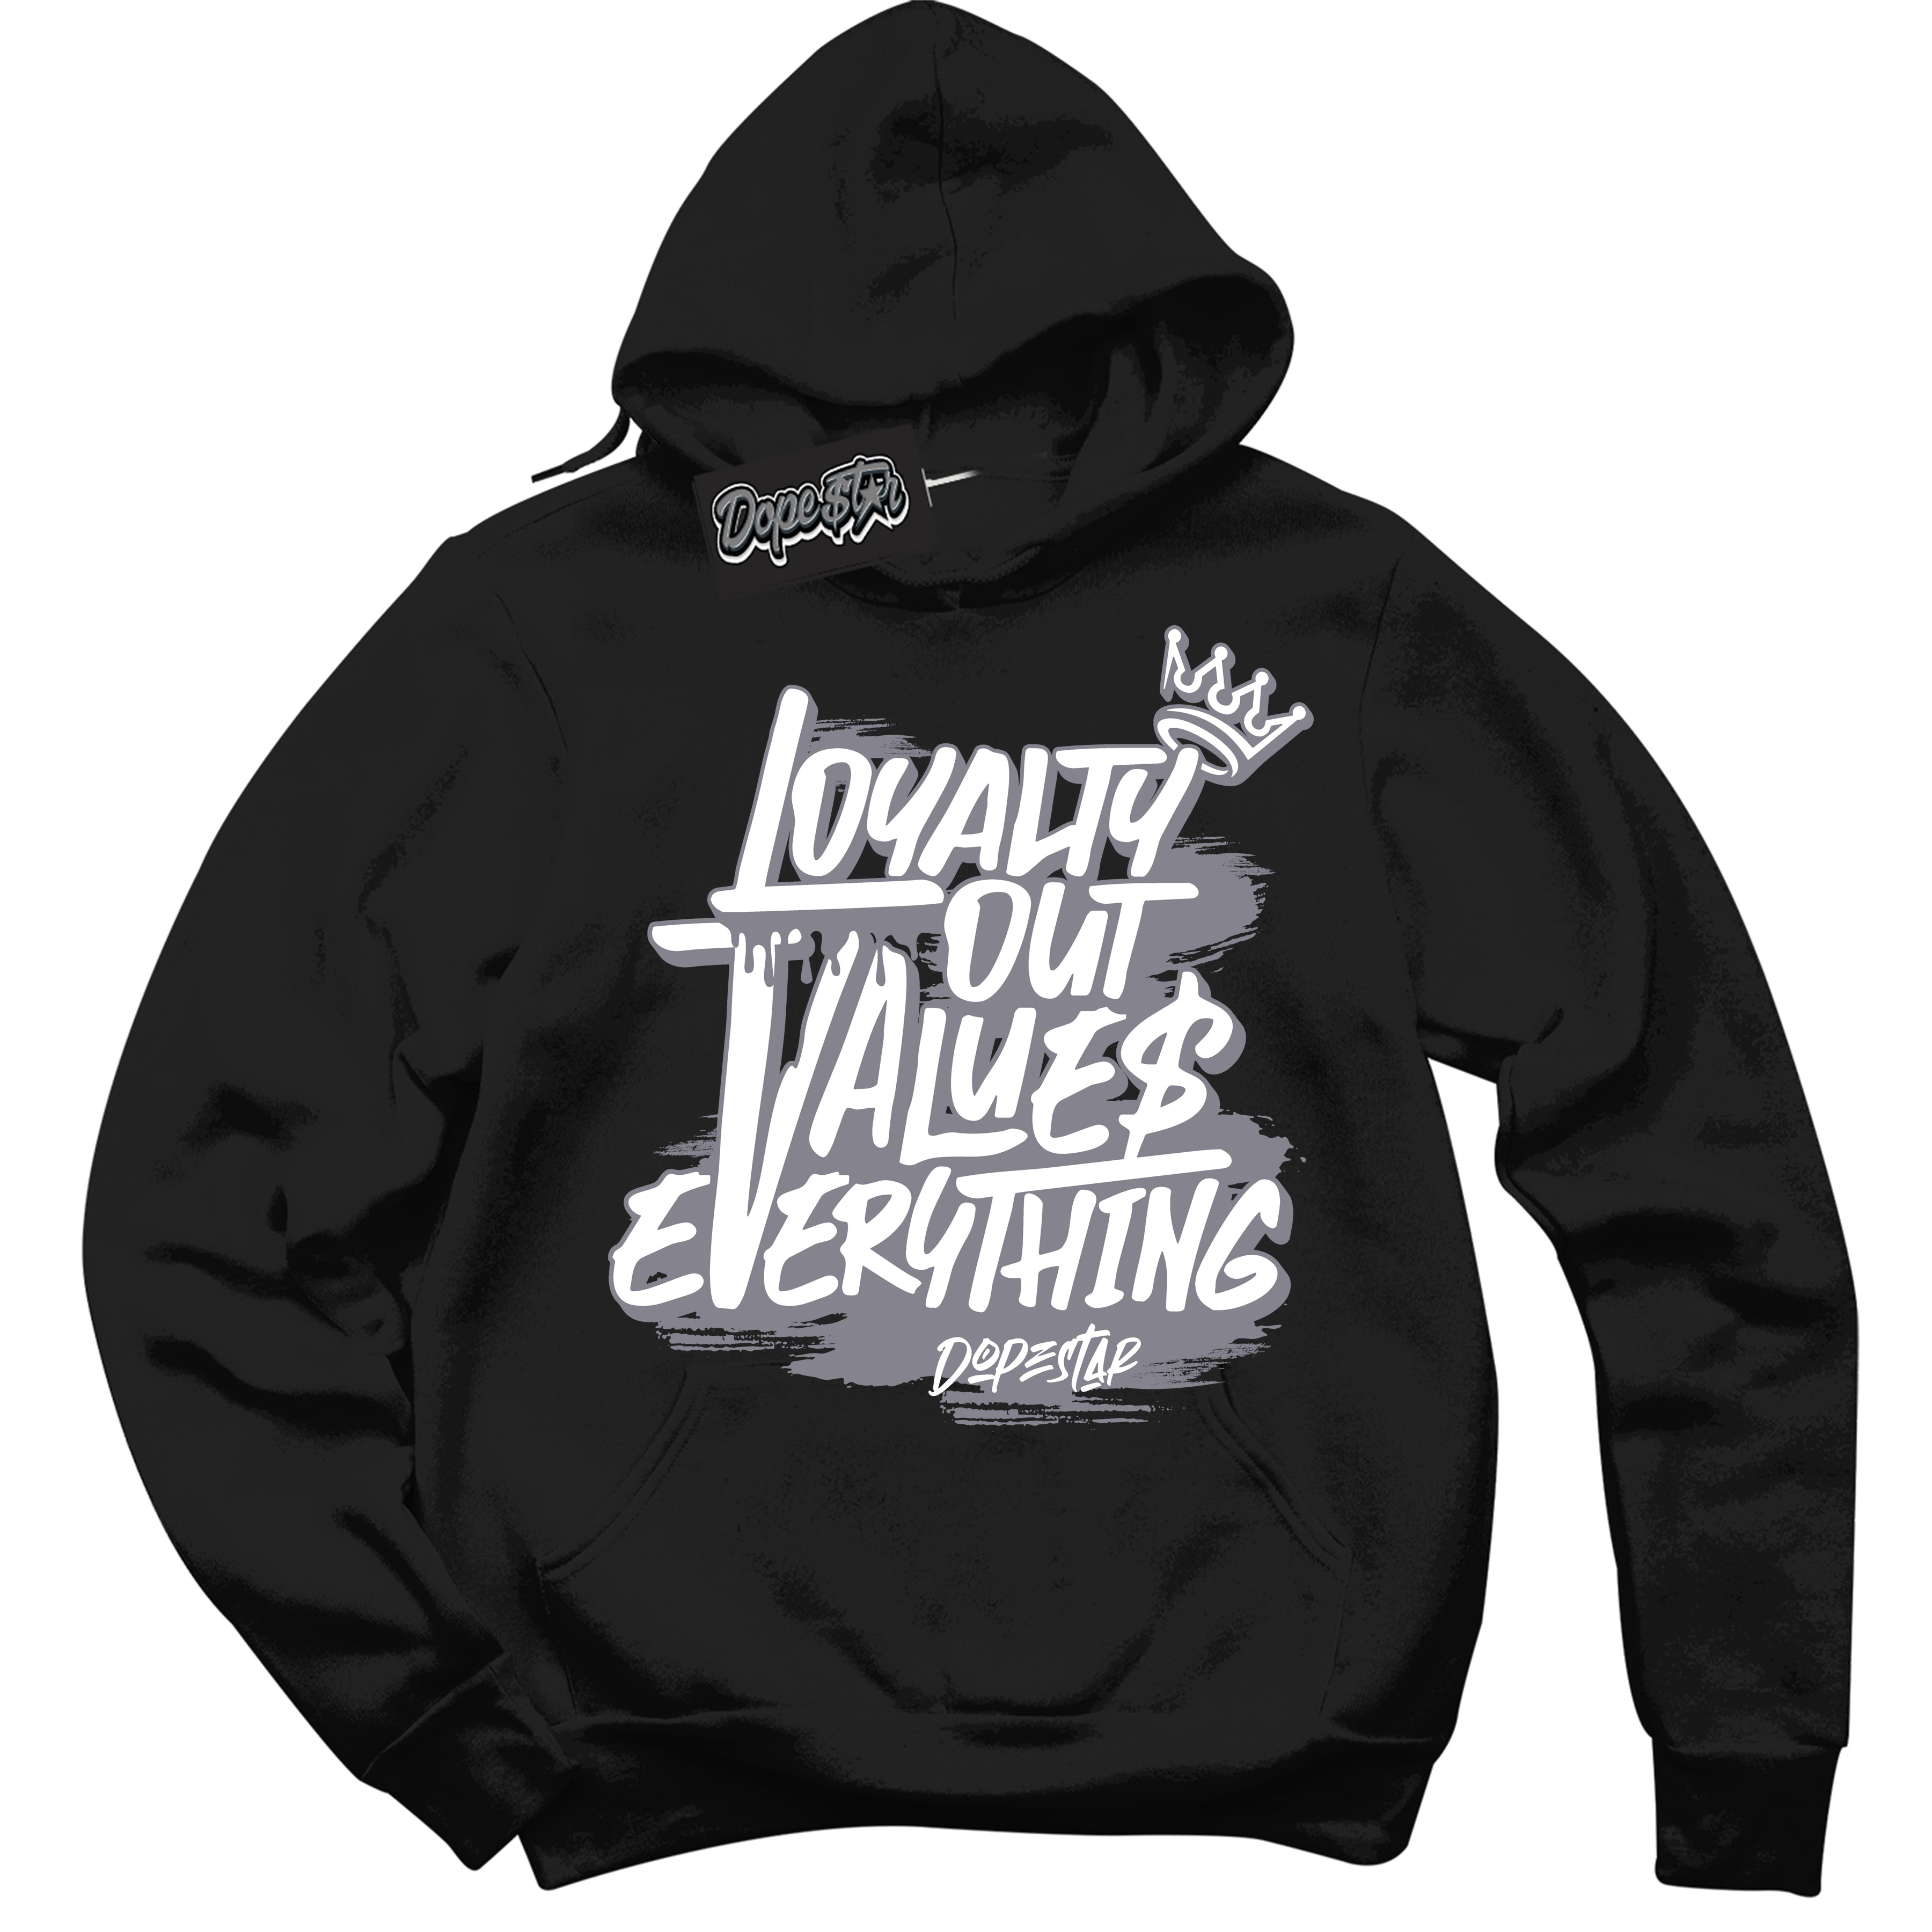 Cool Black Hoodie with “ Loyalty Out Values Everything ”  design that Perfectly Matches  Vintage Stealth Grey 1s Sneakers.